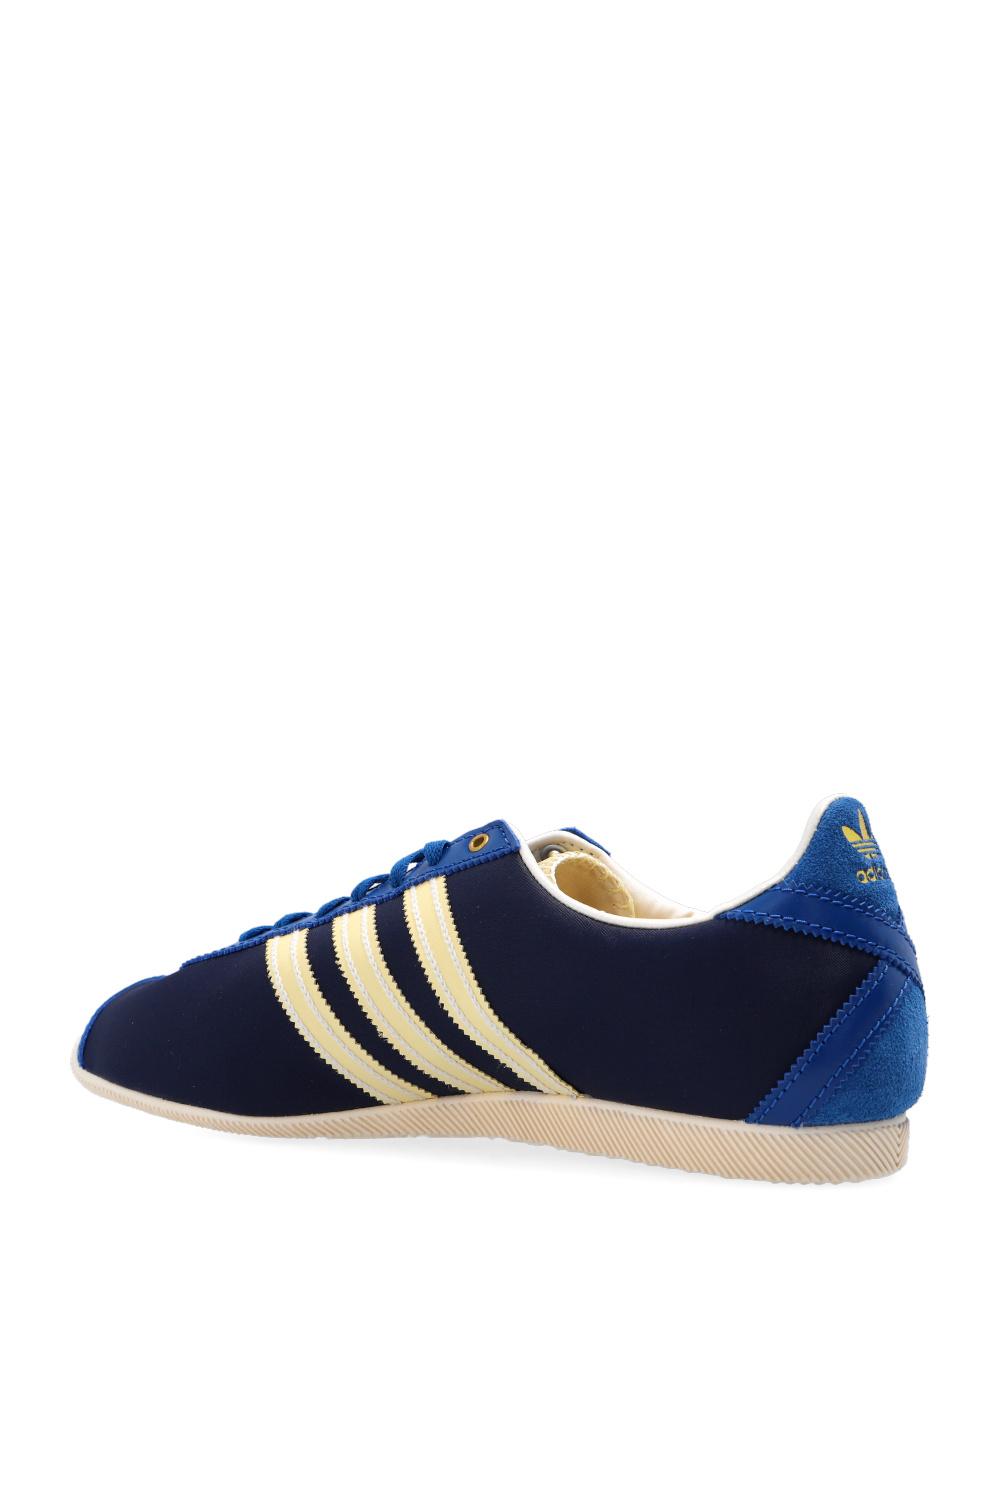 adidas Originals Leather X Wales Bonner in Navy Blue (Blue) for Men | Lyst